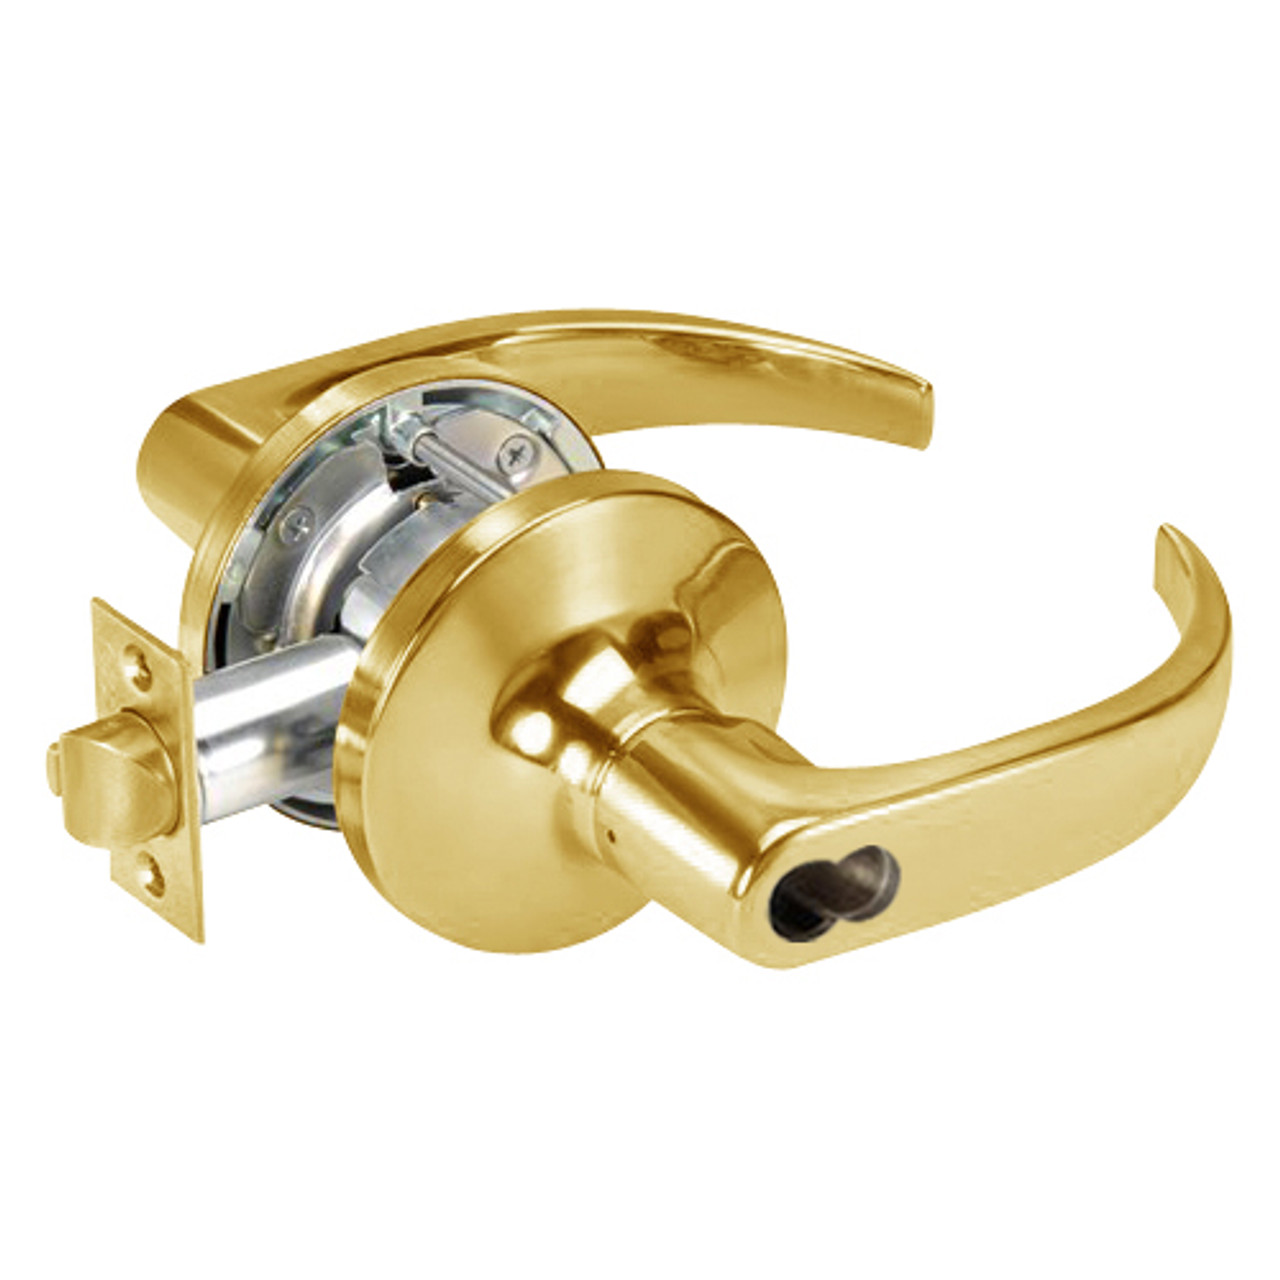 SI-PB5408LN-605 Yale 5400LN Series Single Cylinder Classroom Cylindrical Locks with Pacific Beach Lever Prepped for Schlage IC Core in Bright Brass